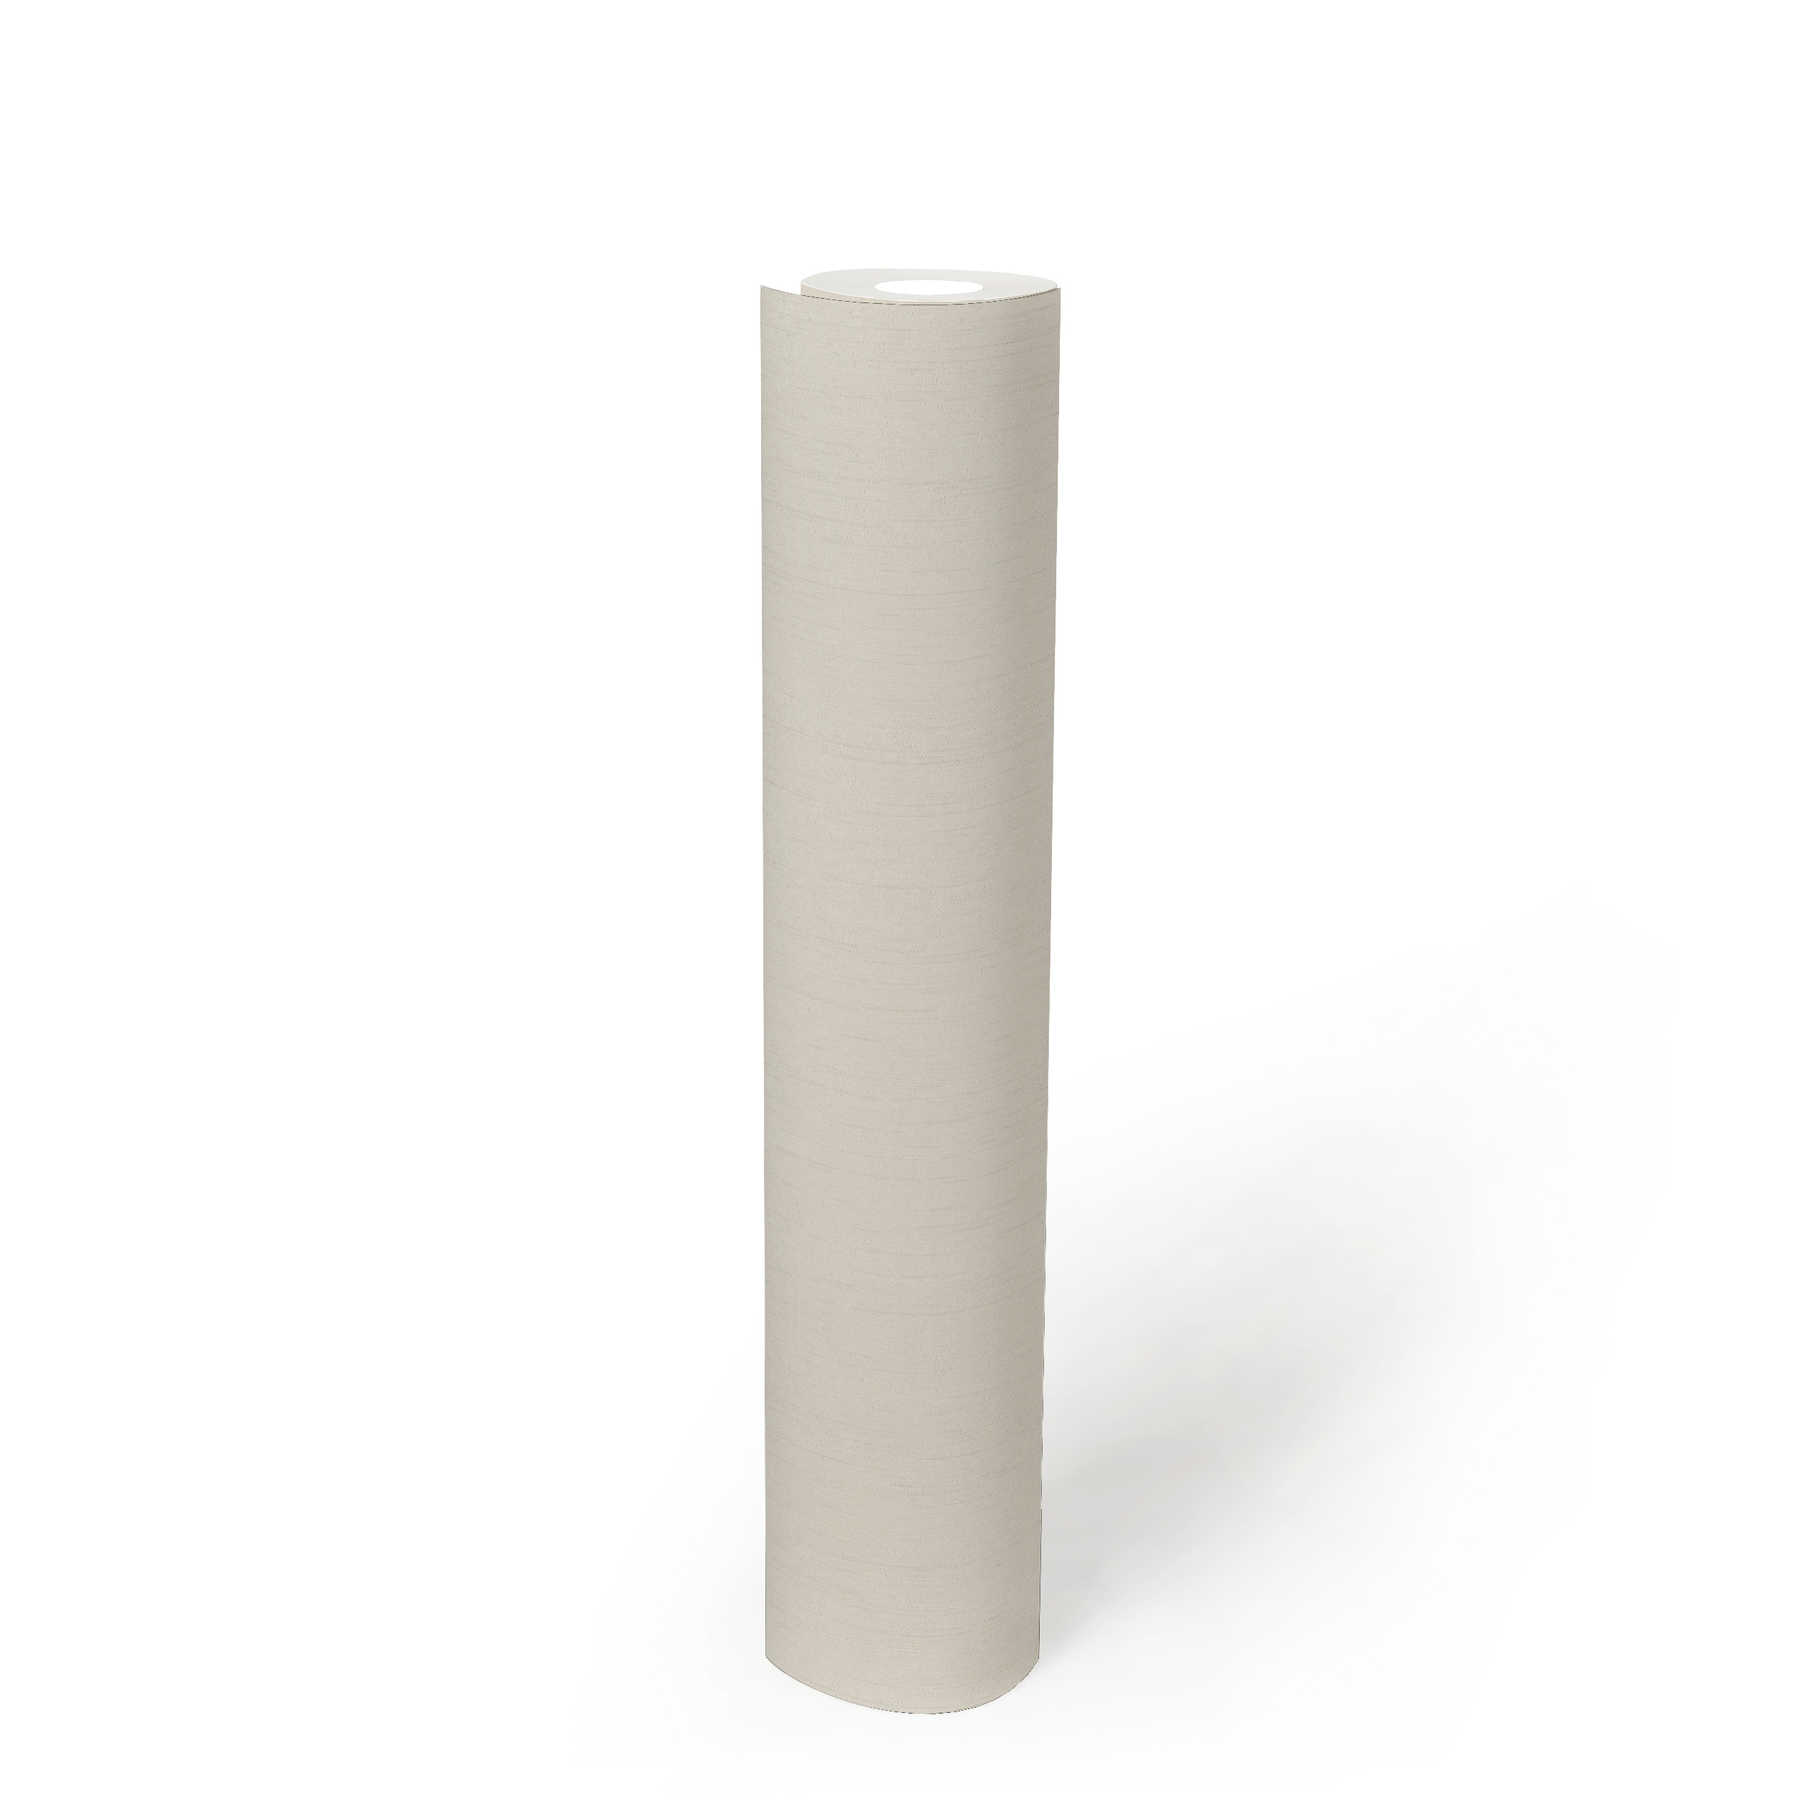             Wood look wallpaper cream bamboo with embossed structure
        